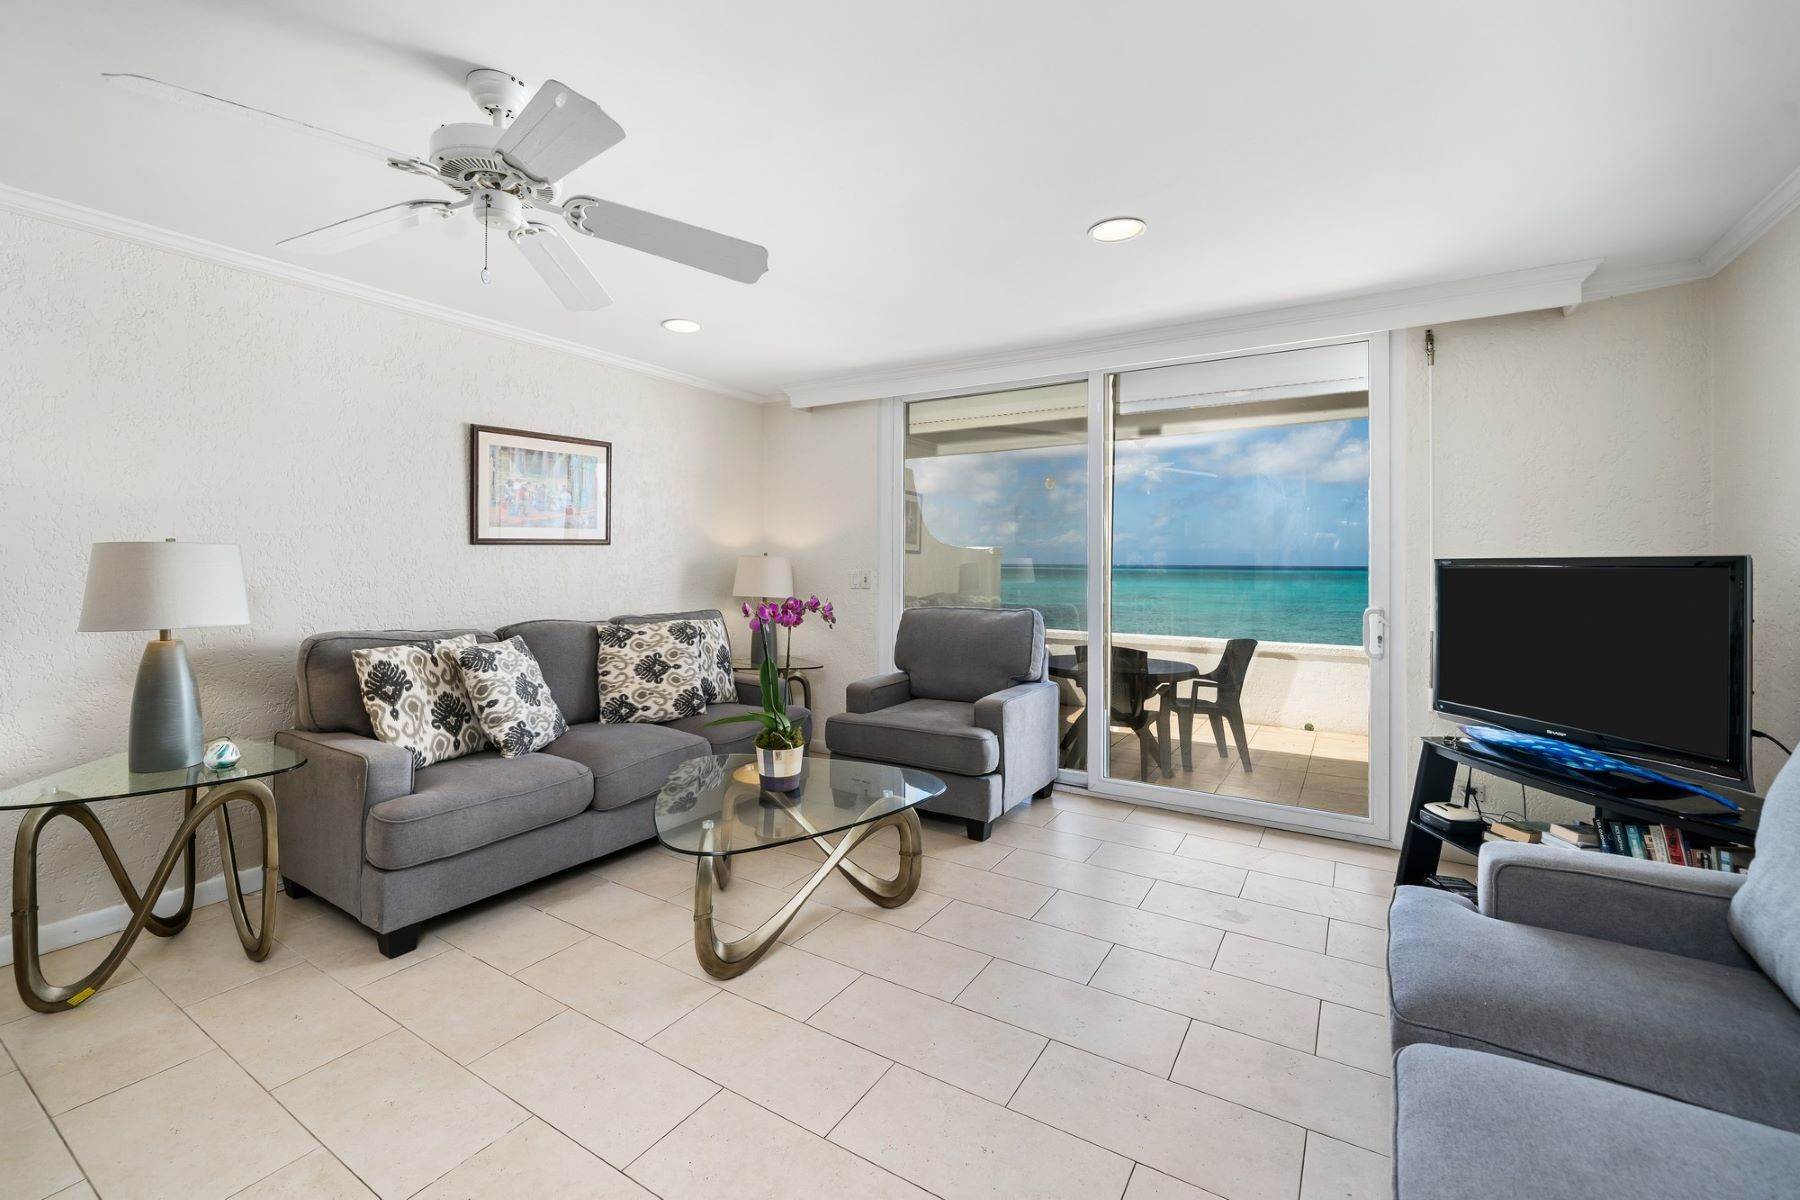 6. townhouses at 46 Delaporte Oceanfront Townhouse Delaporte Point, Cable Beach, Nassau and Paradise Island Bahamas